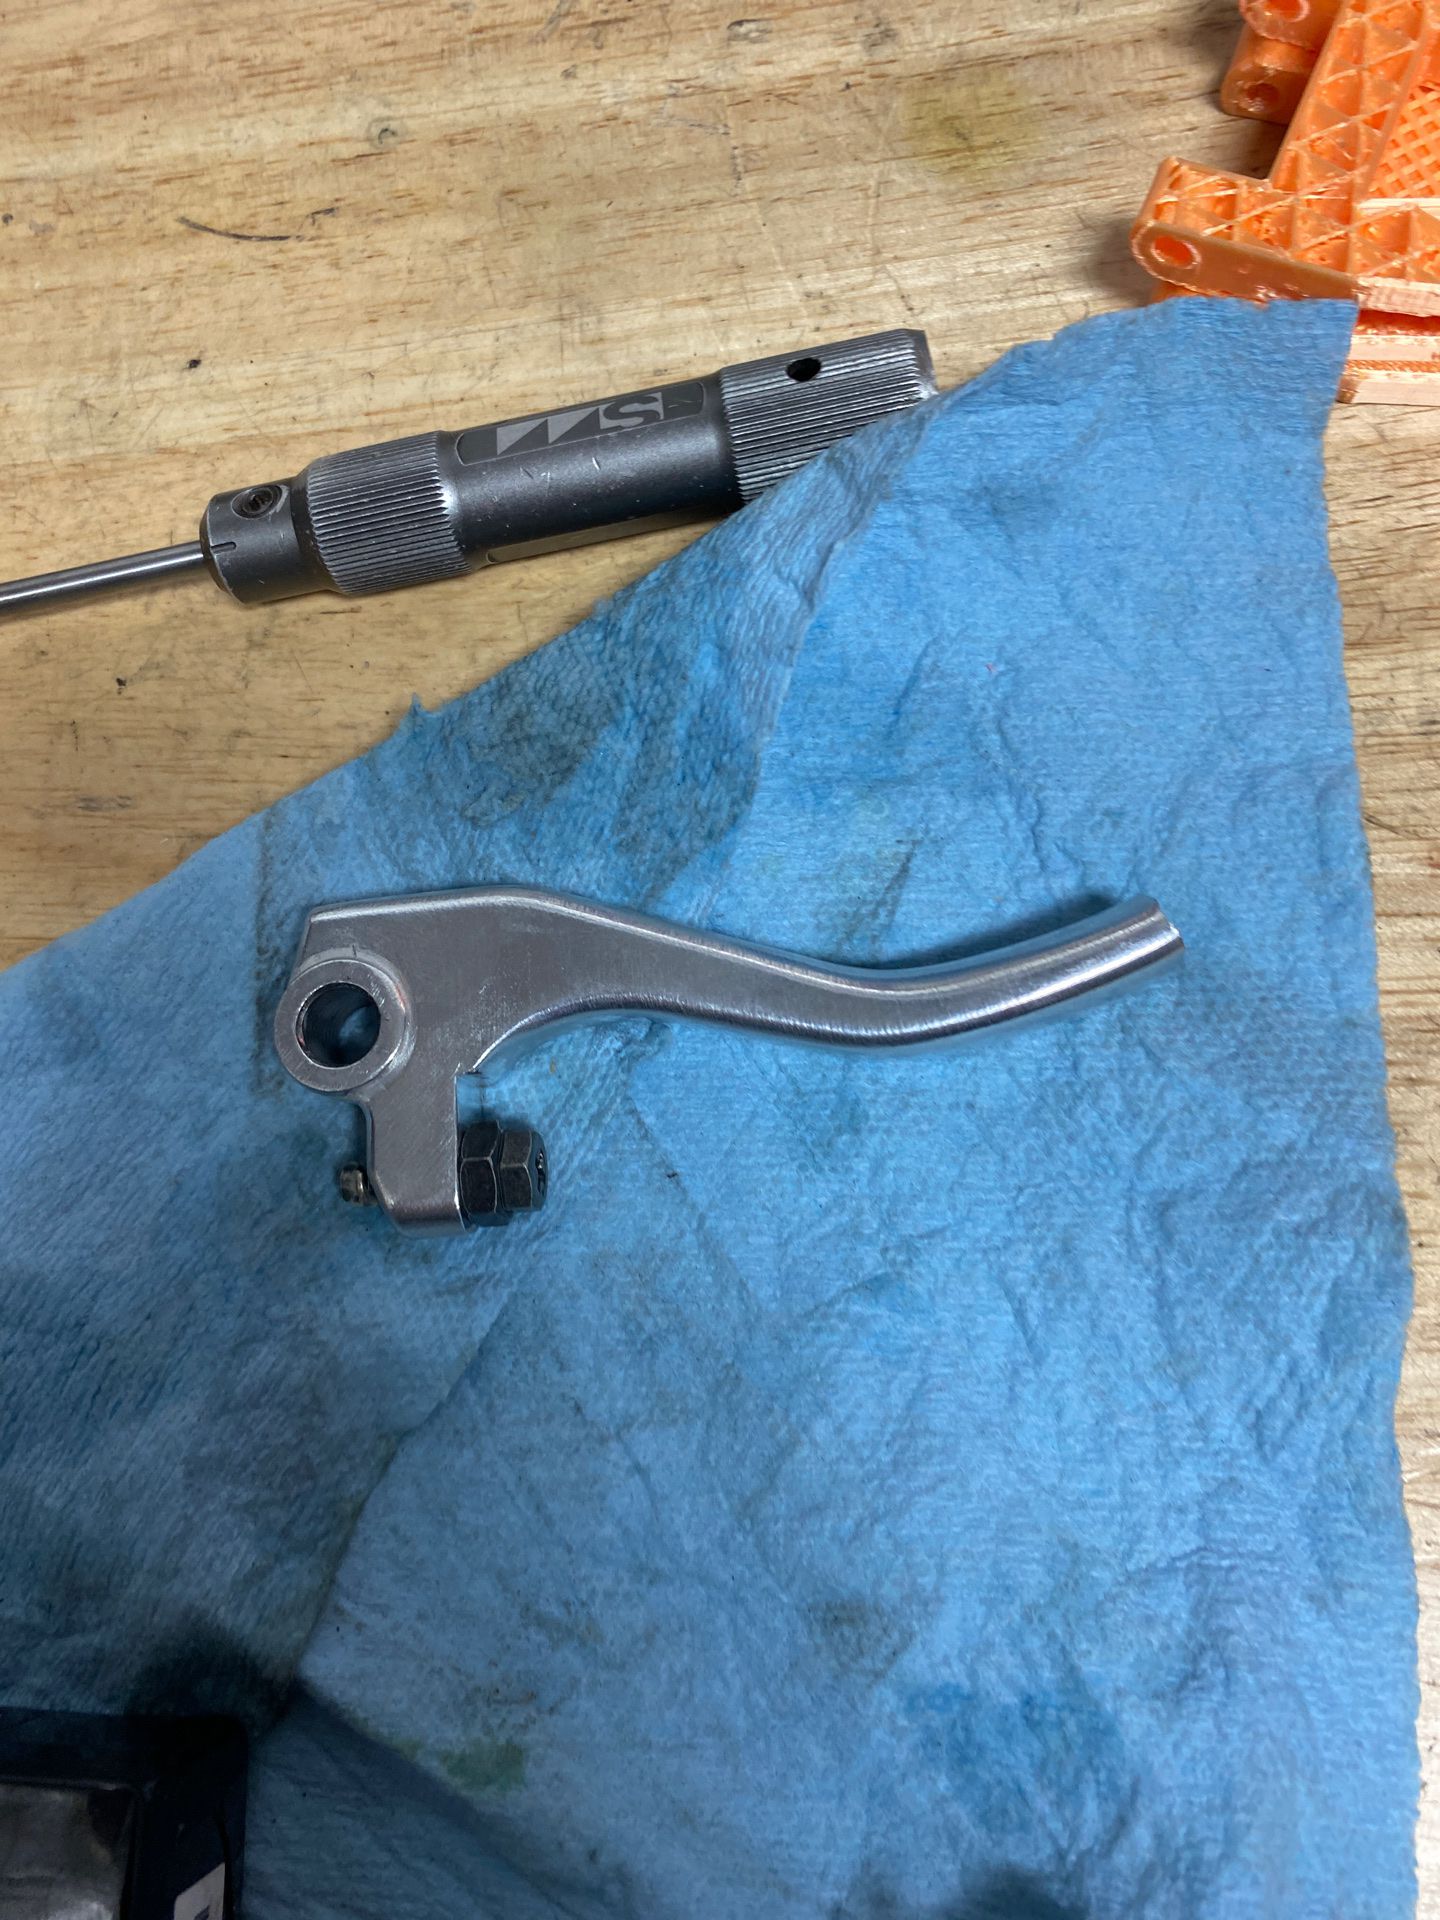 2020 honda CRF trail series brake lever (crf50, 110, 125, 150f, 230, and probably most of the race models and even other brands